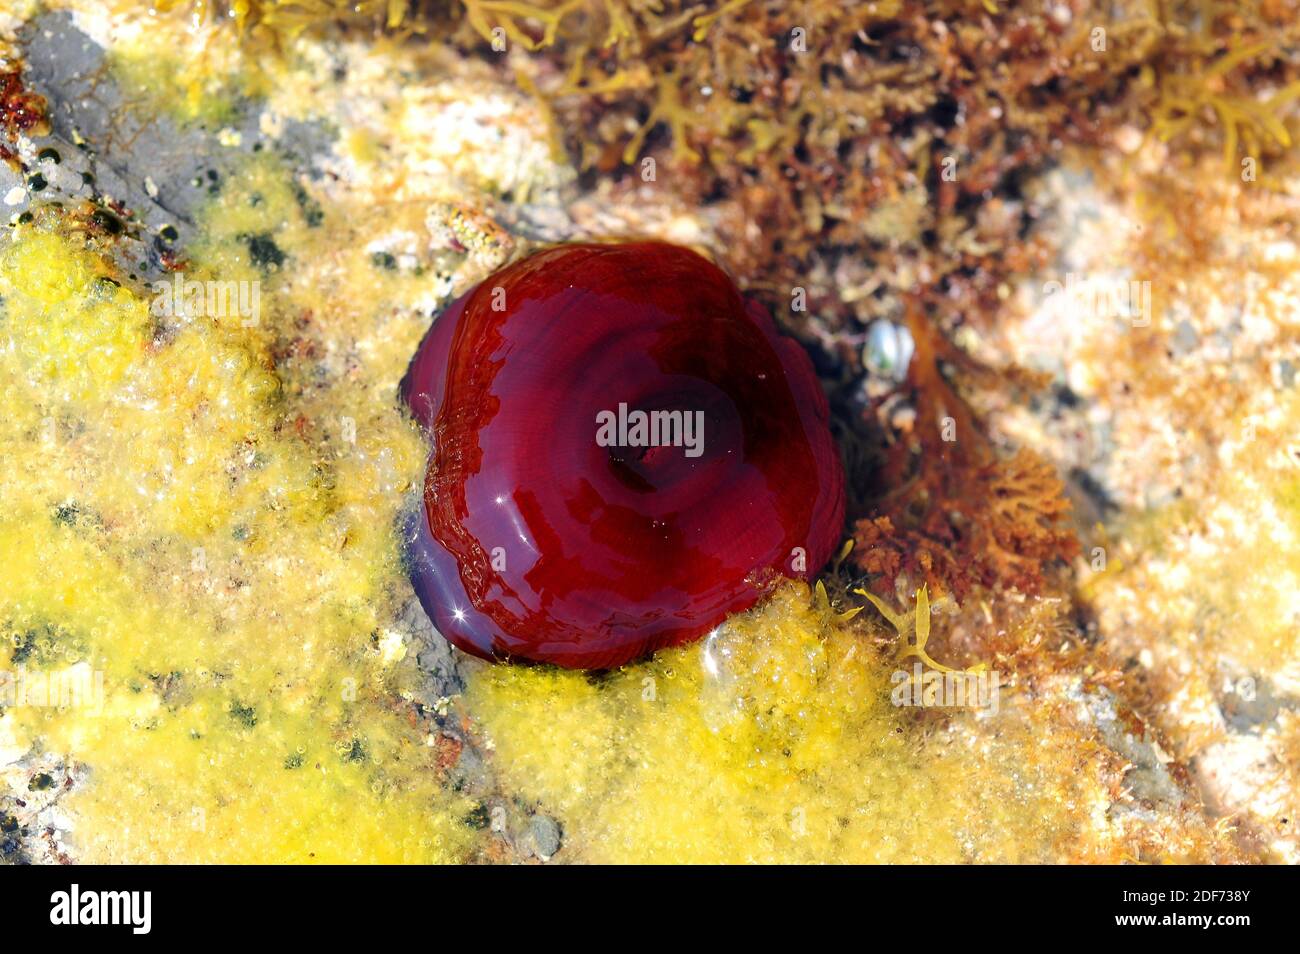 Beadlet anemone (Actinia equina) is a viviparous sea anemone found on rocky shores around coasts of western Europe and Africa and Mediterranean Sea. Stock Photo